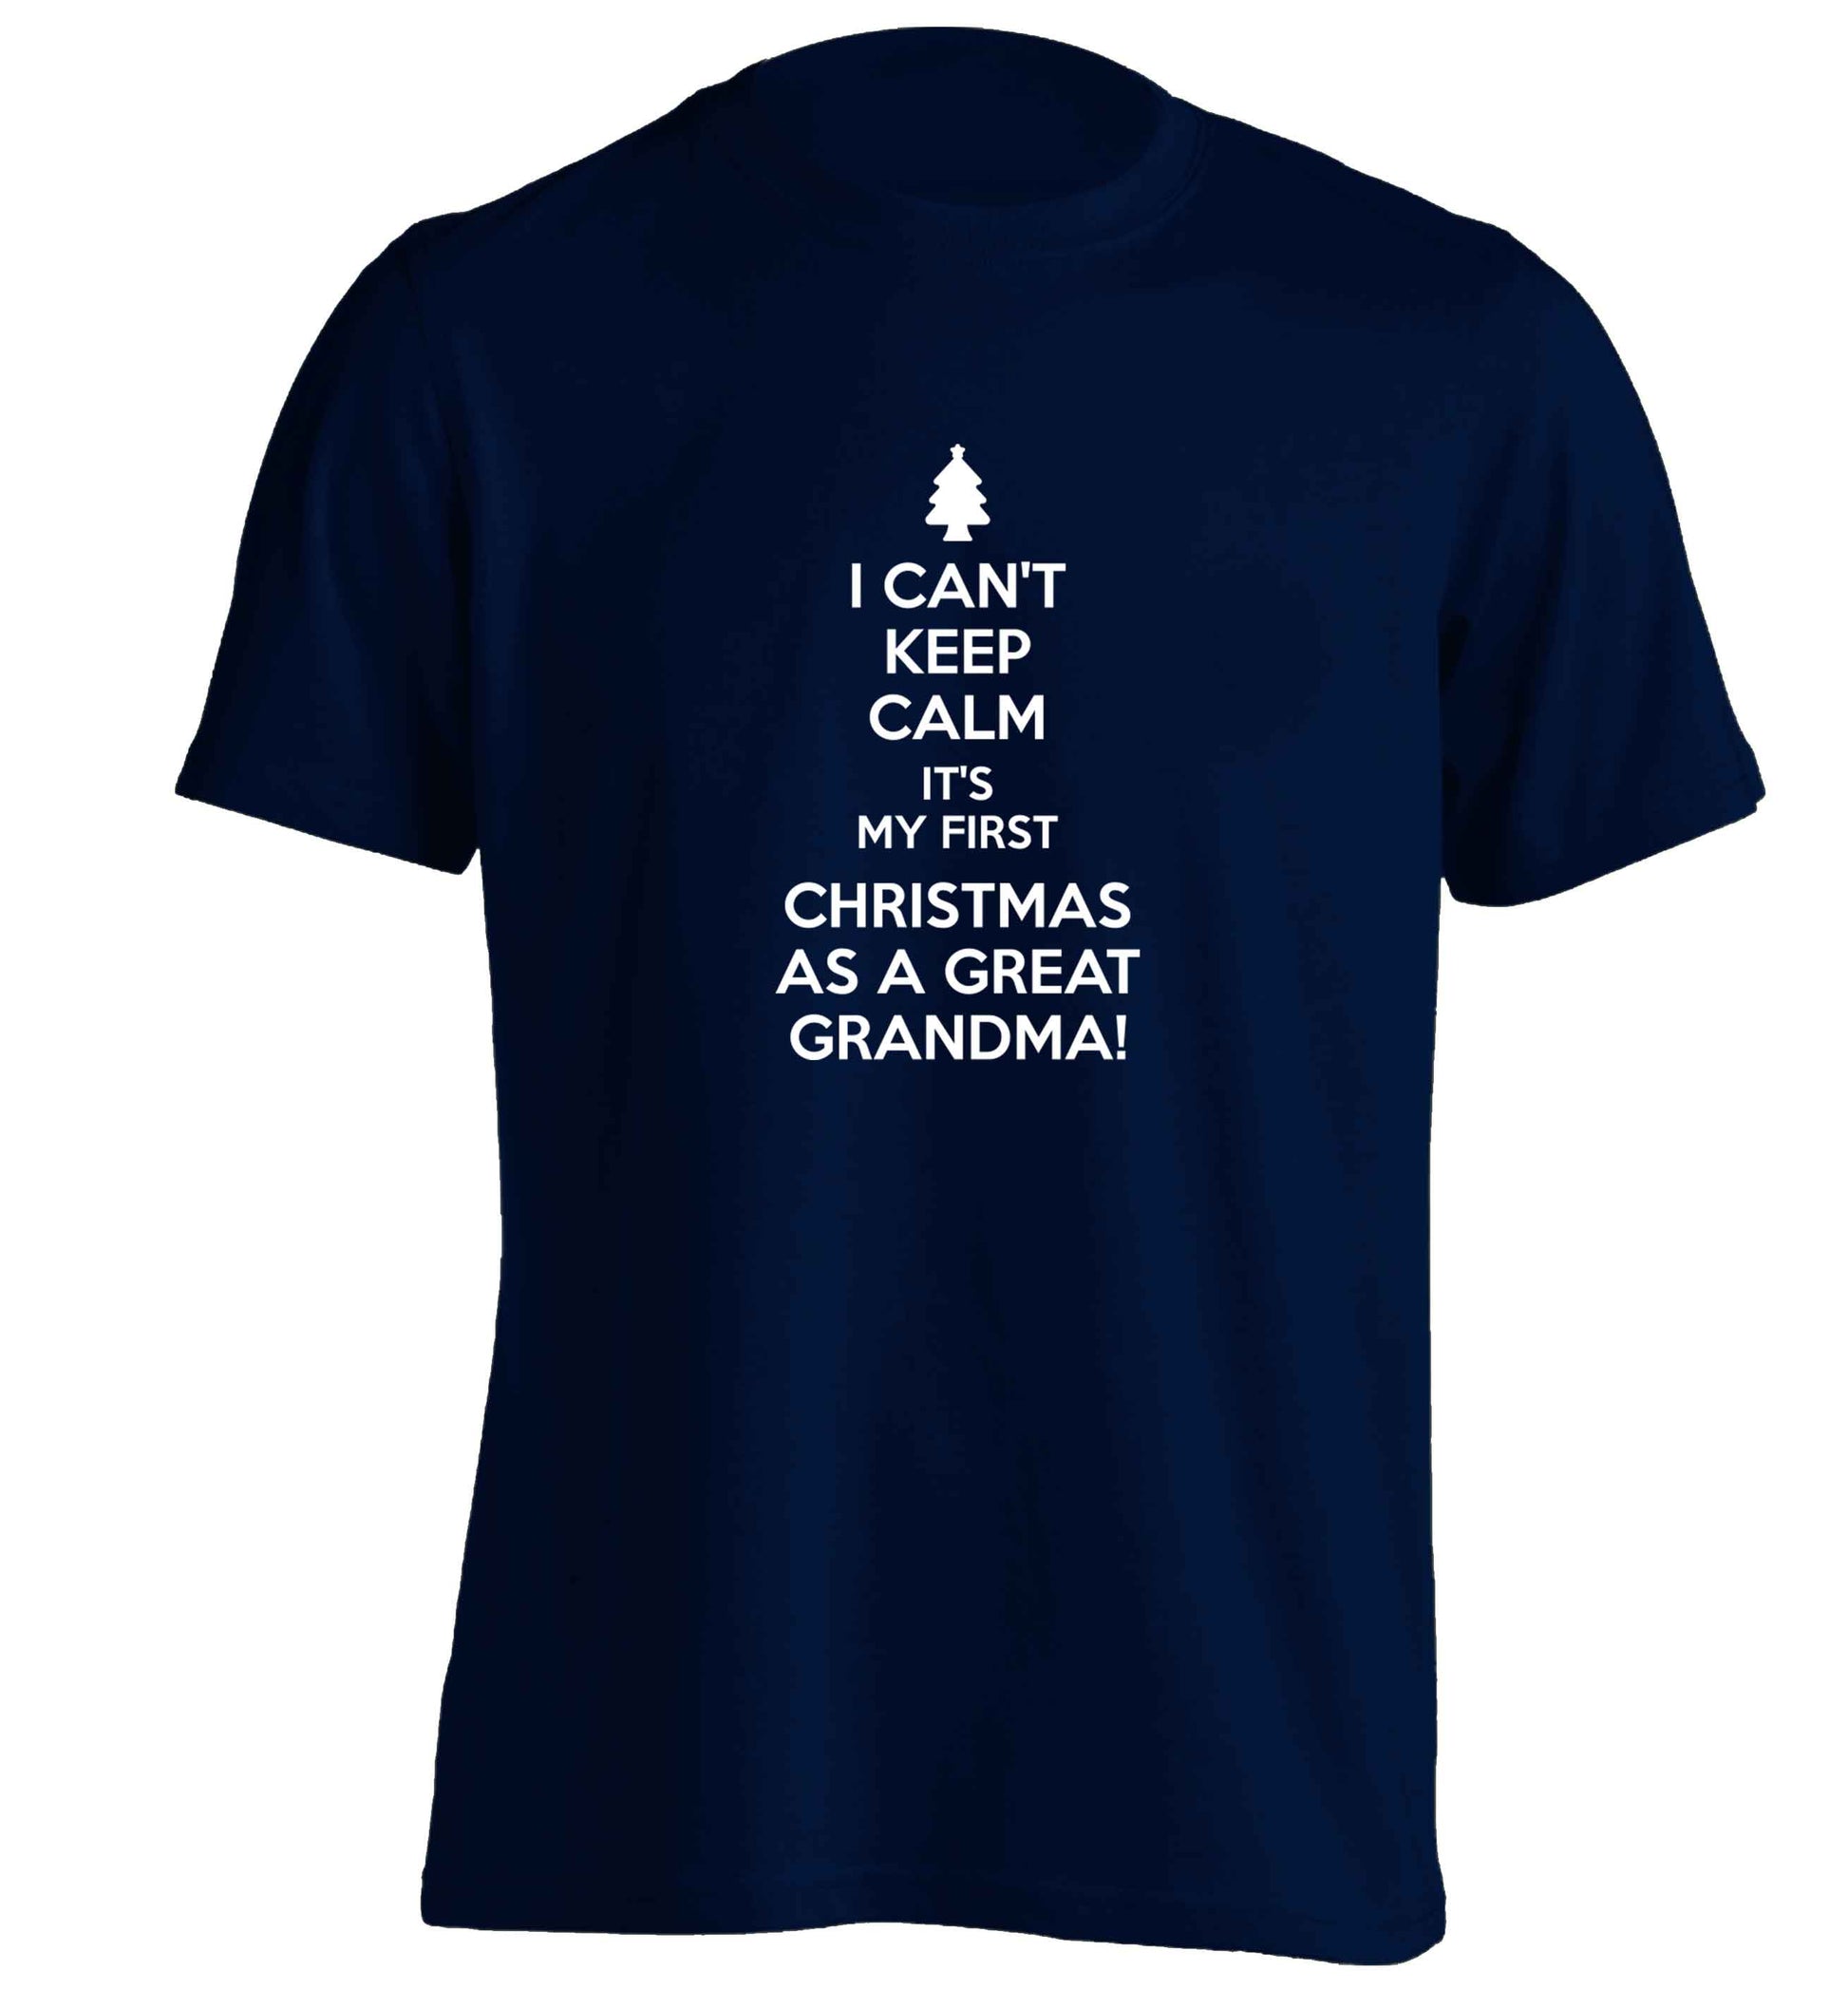 I can't keep calm it's my first Christmas as a great grandma! adults unisex navy Tshirt 2XL